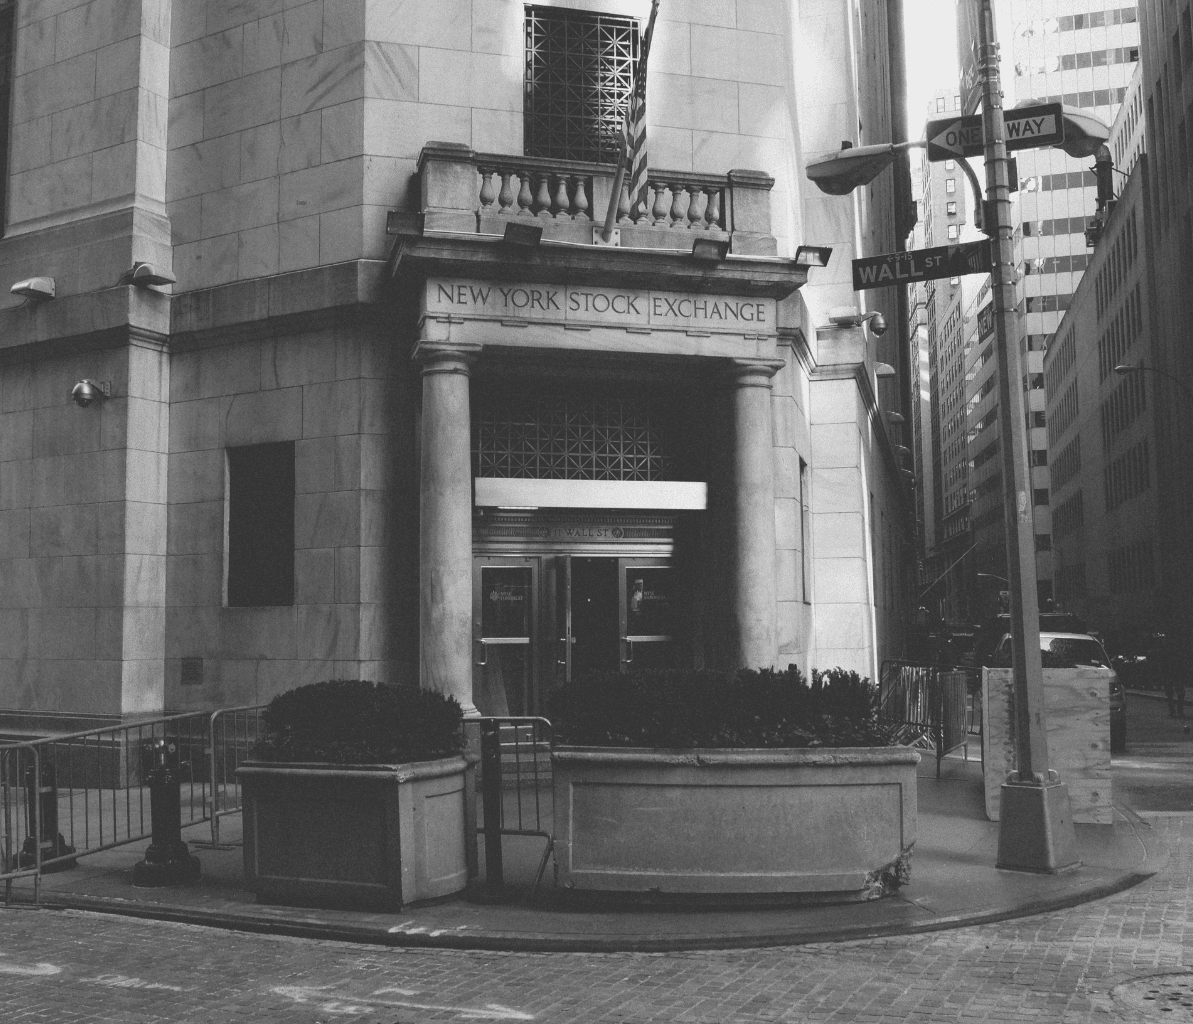 Black and white image of new york stock exchange entrance